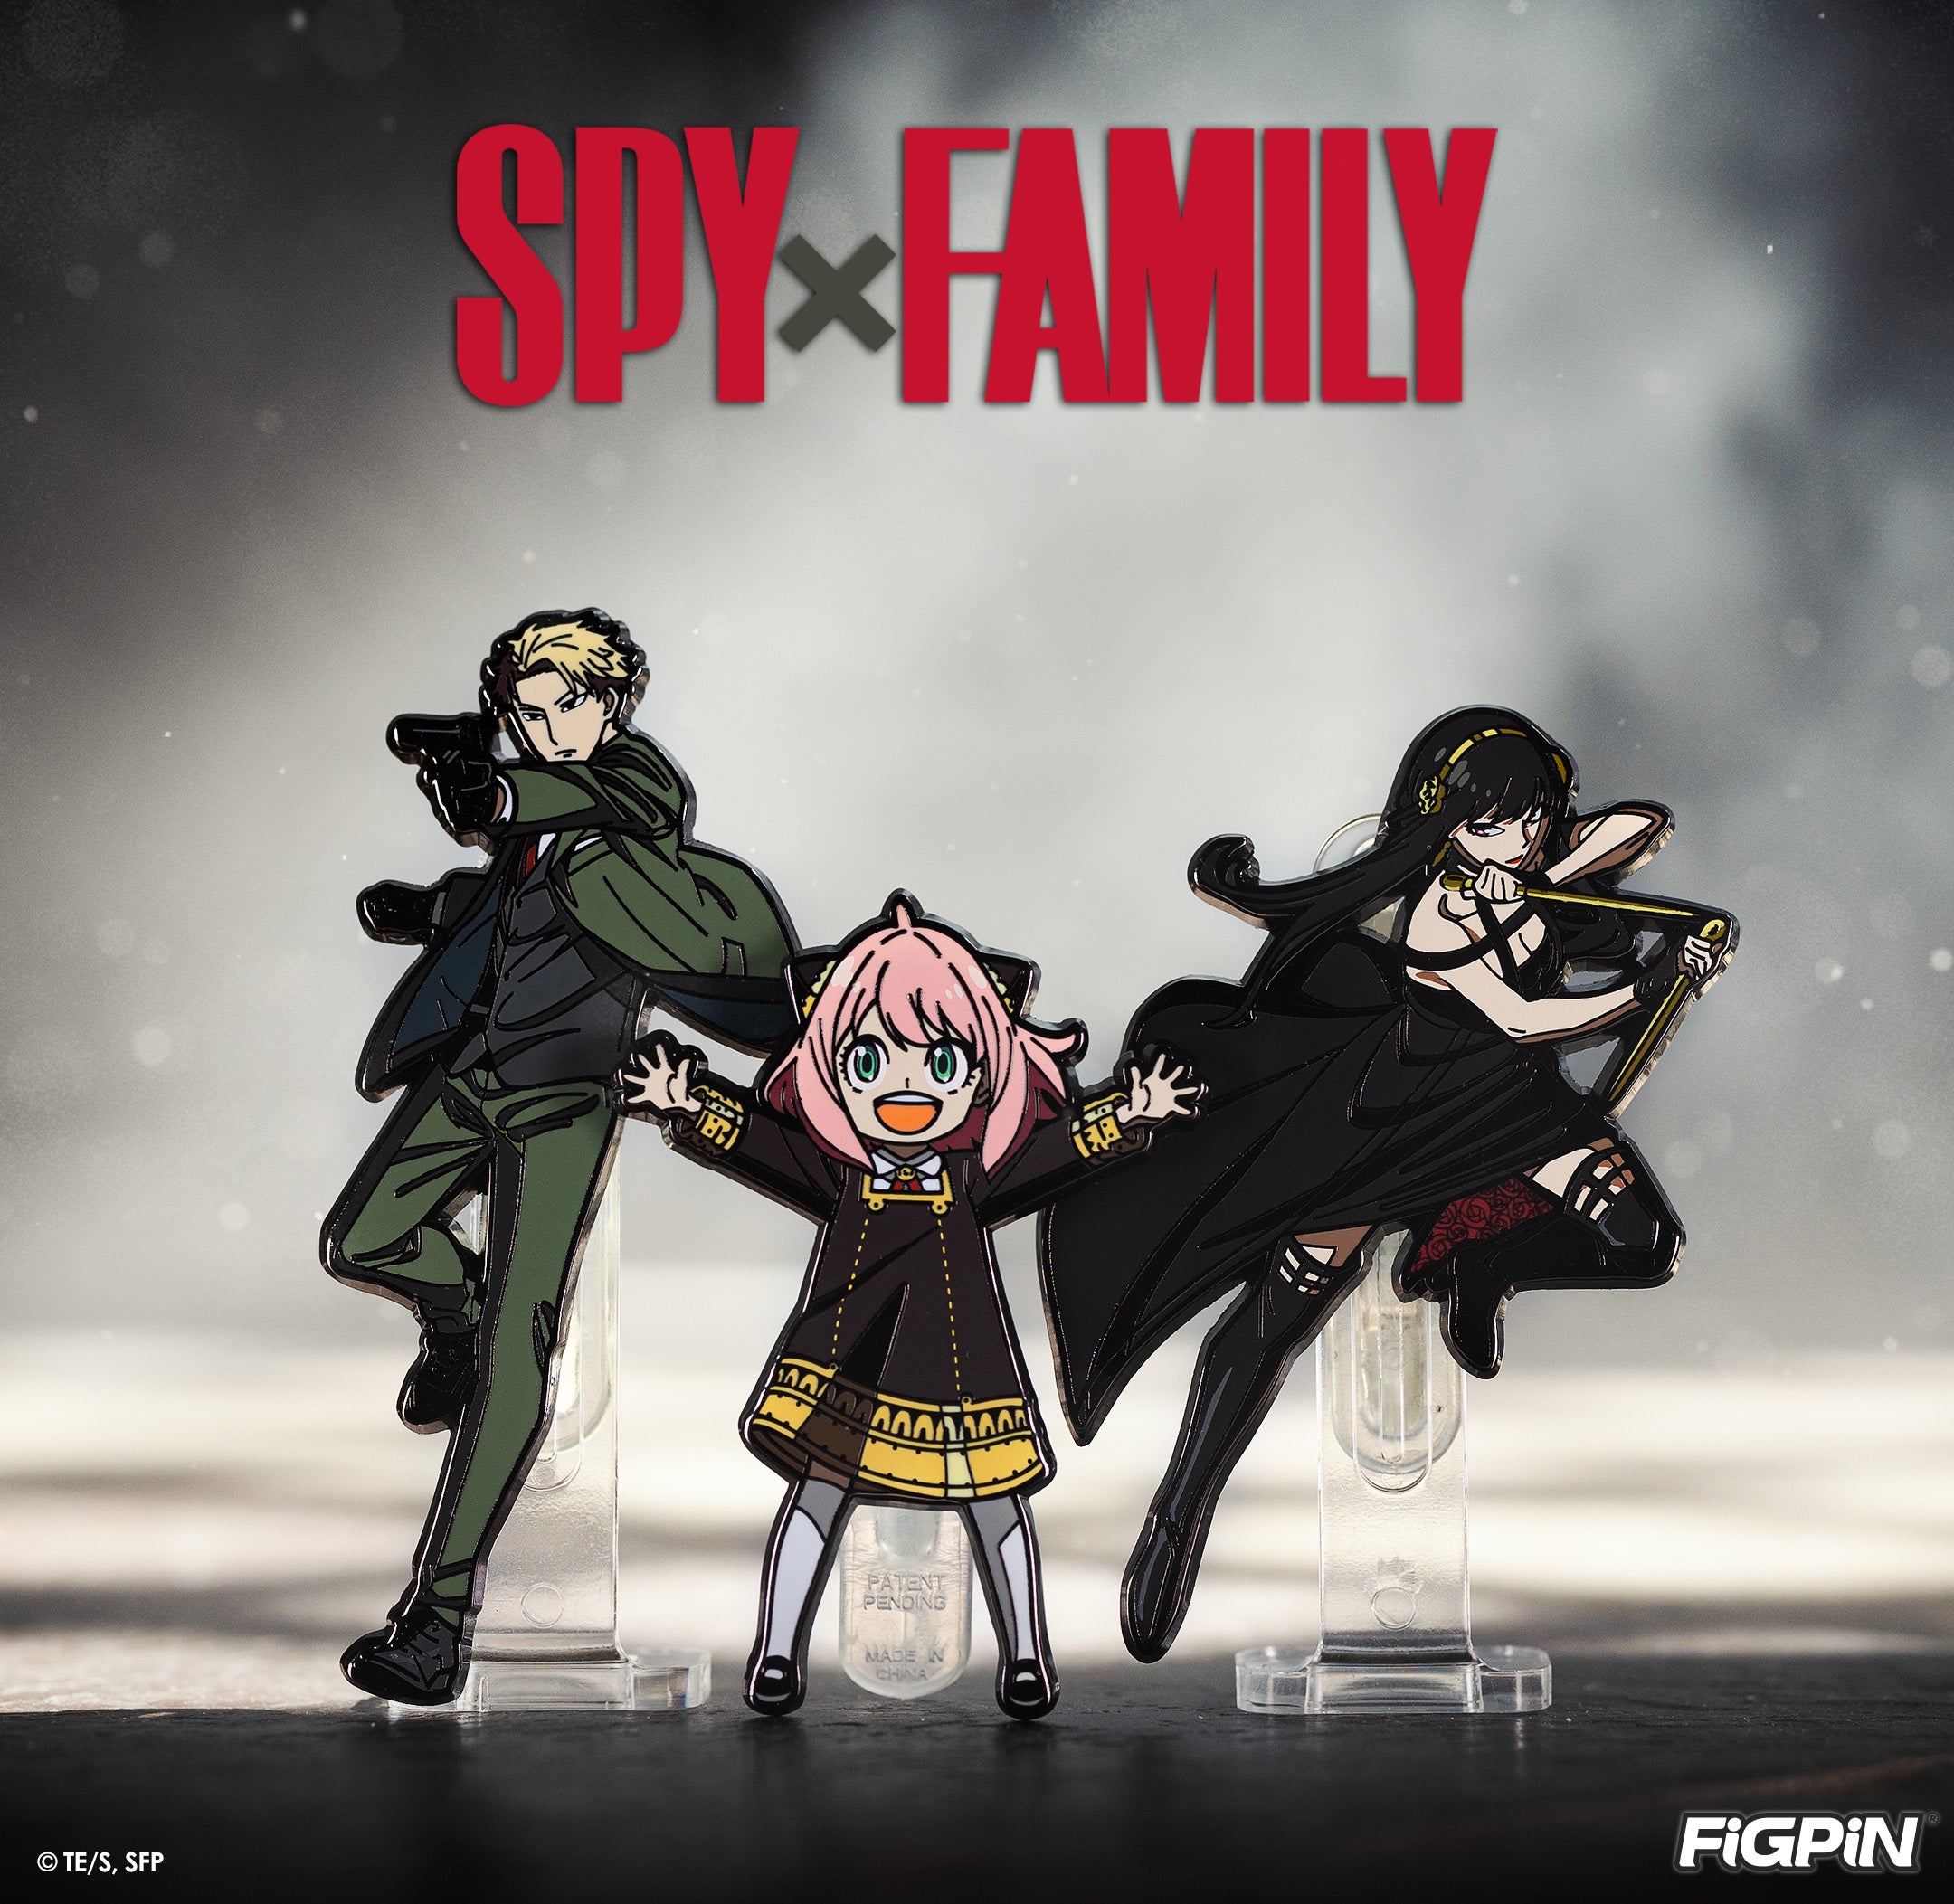 Photograph of SPY x FAMILY characters available as enamel pins in this SPY x FAMILY FiGPiN wave release